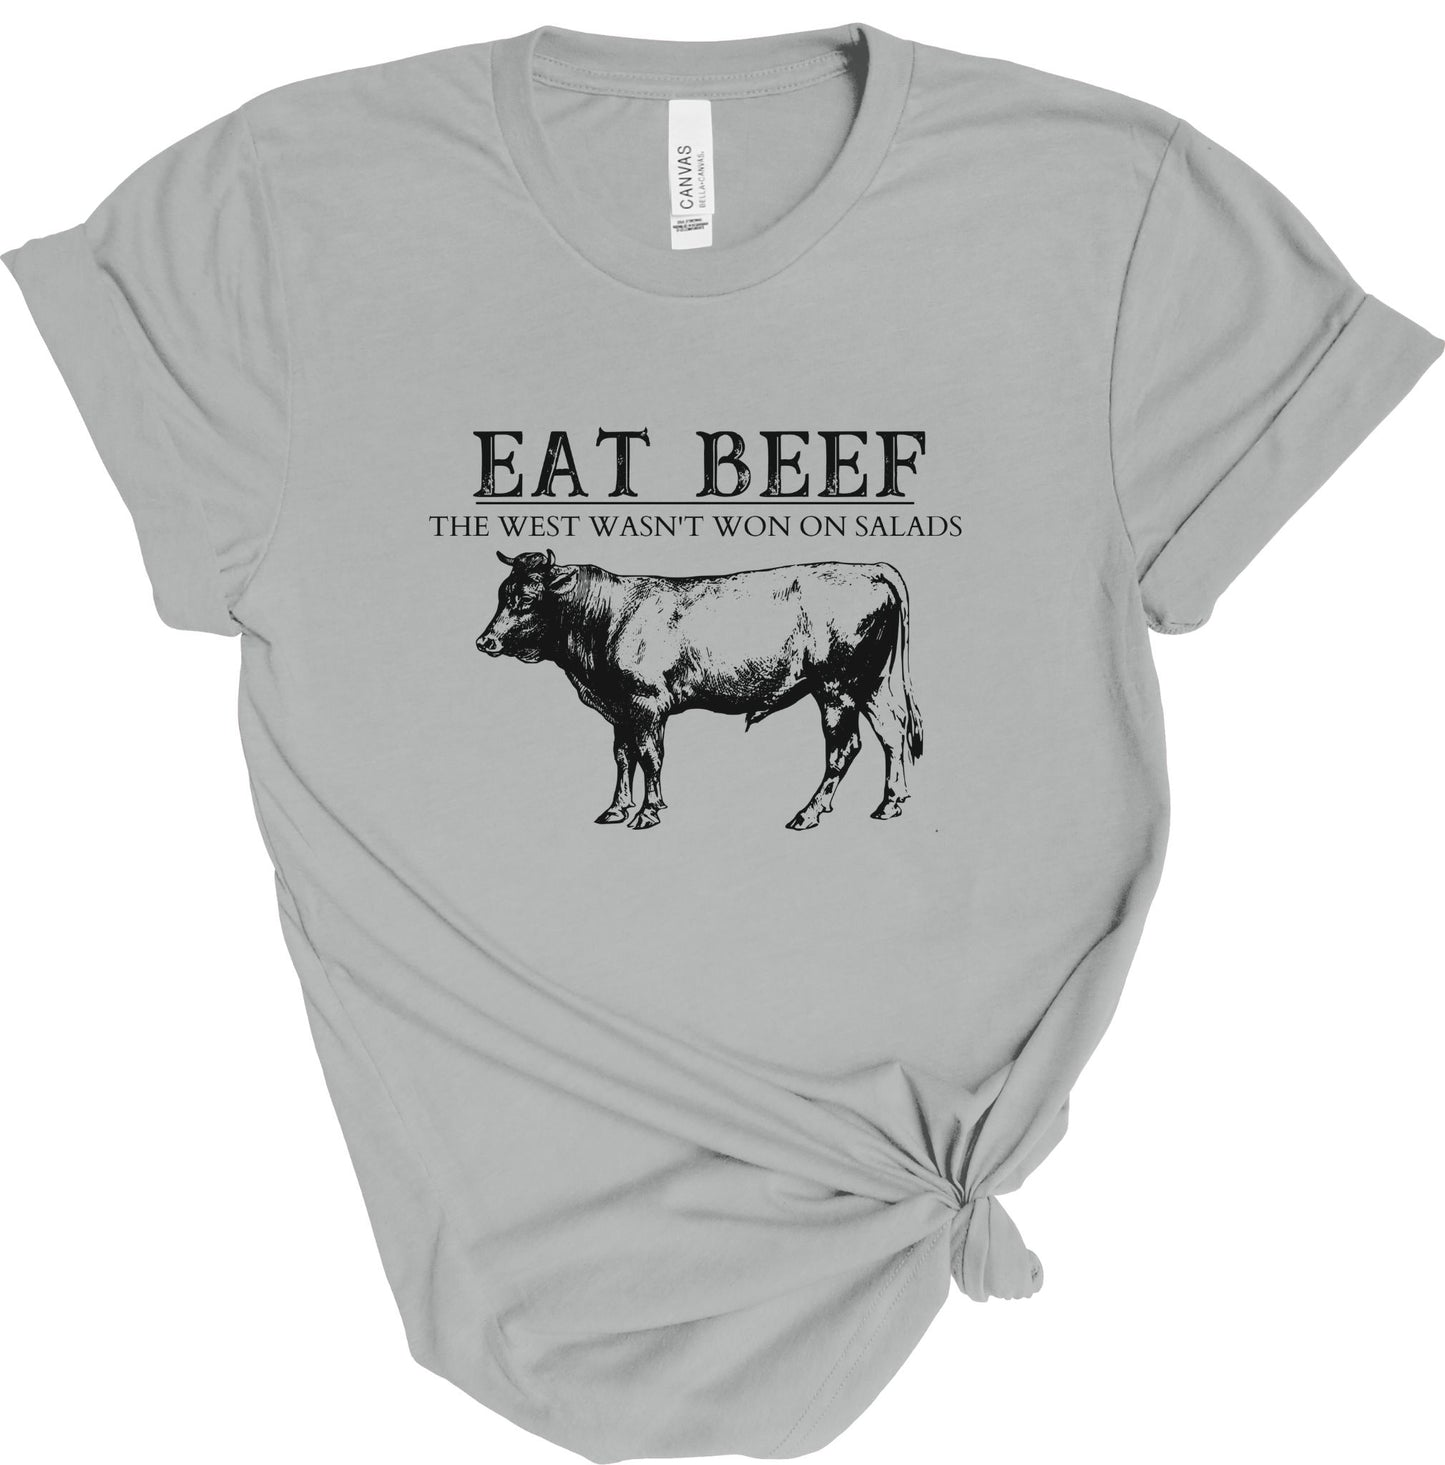 EAT BEEF. THE WEST WASN'T WON ON SALADS TEE